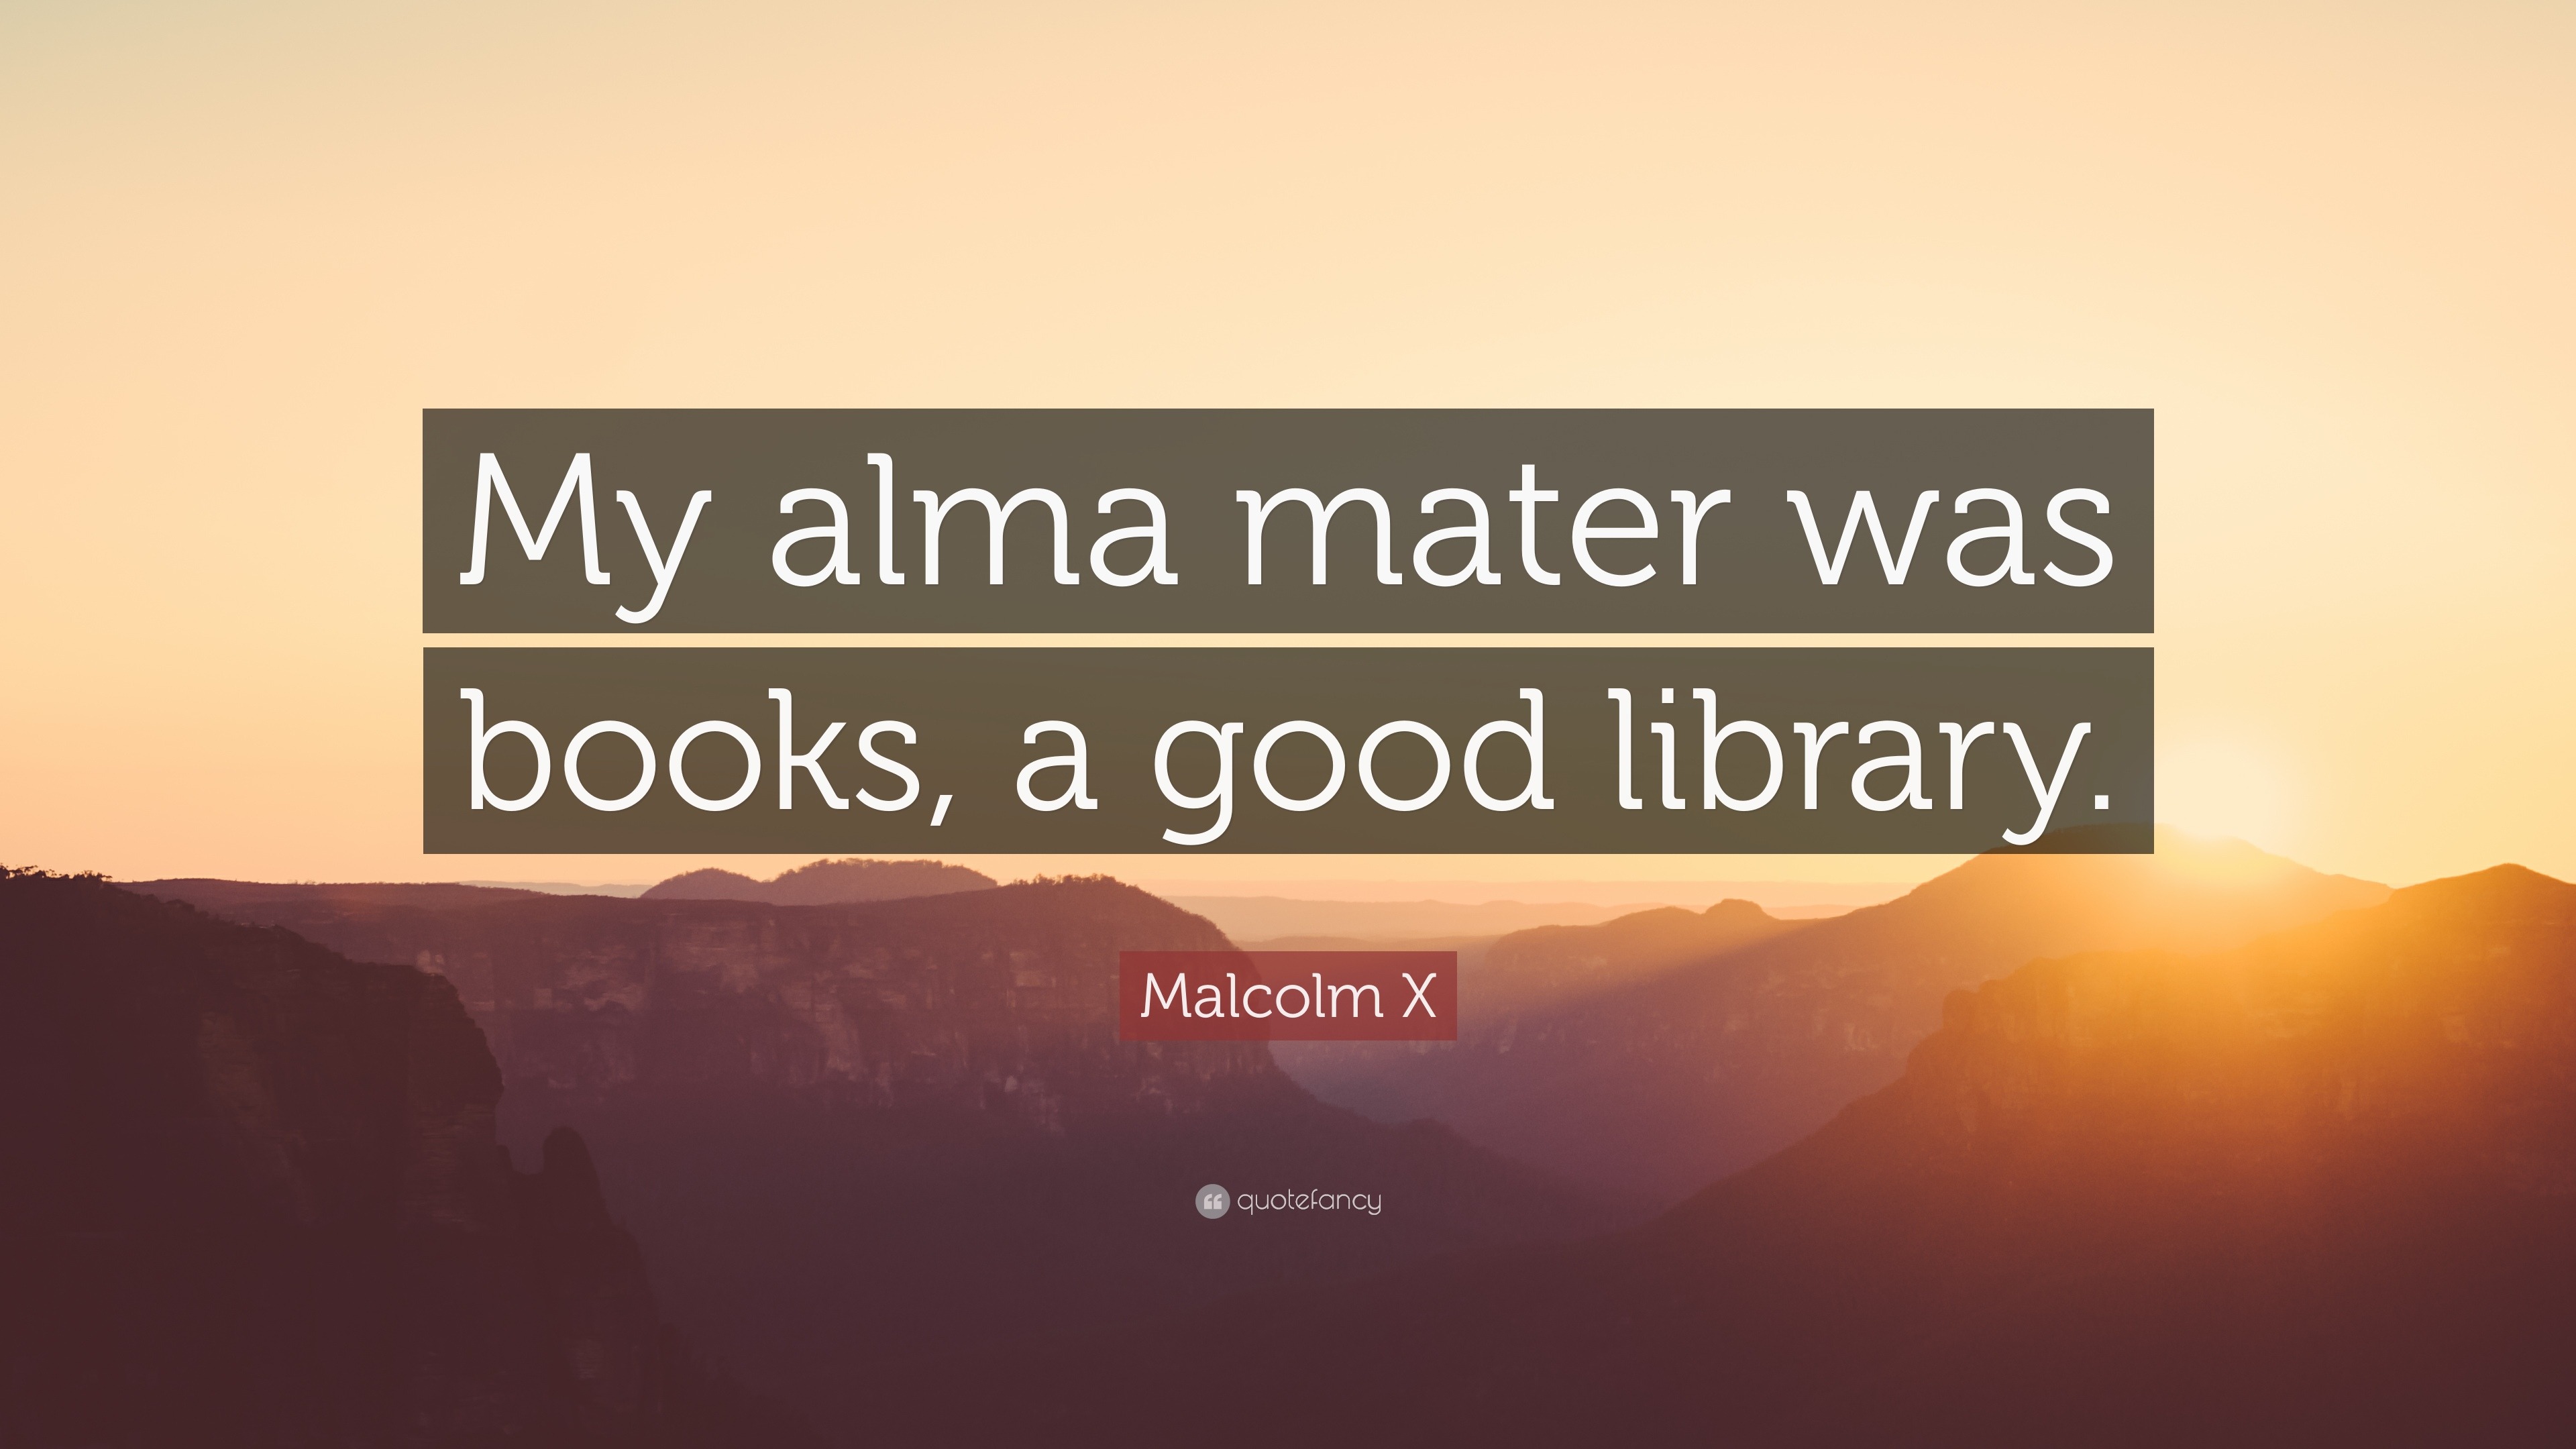 Malcolm X Quote: “My alma mater was books, a good library.”